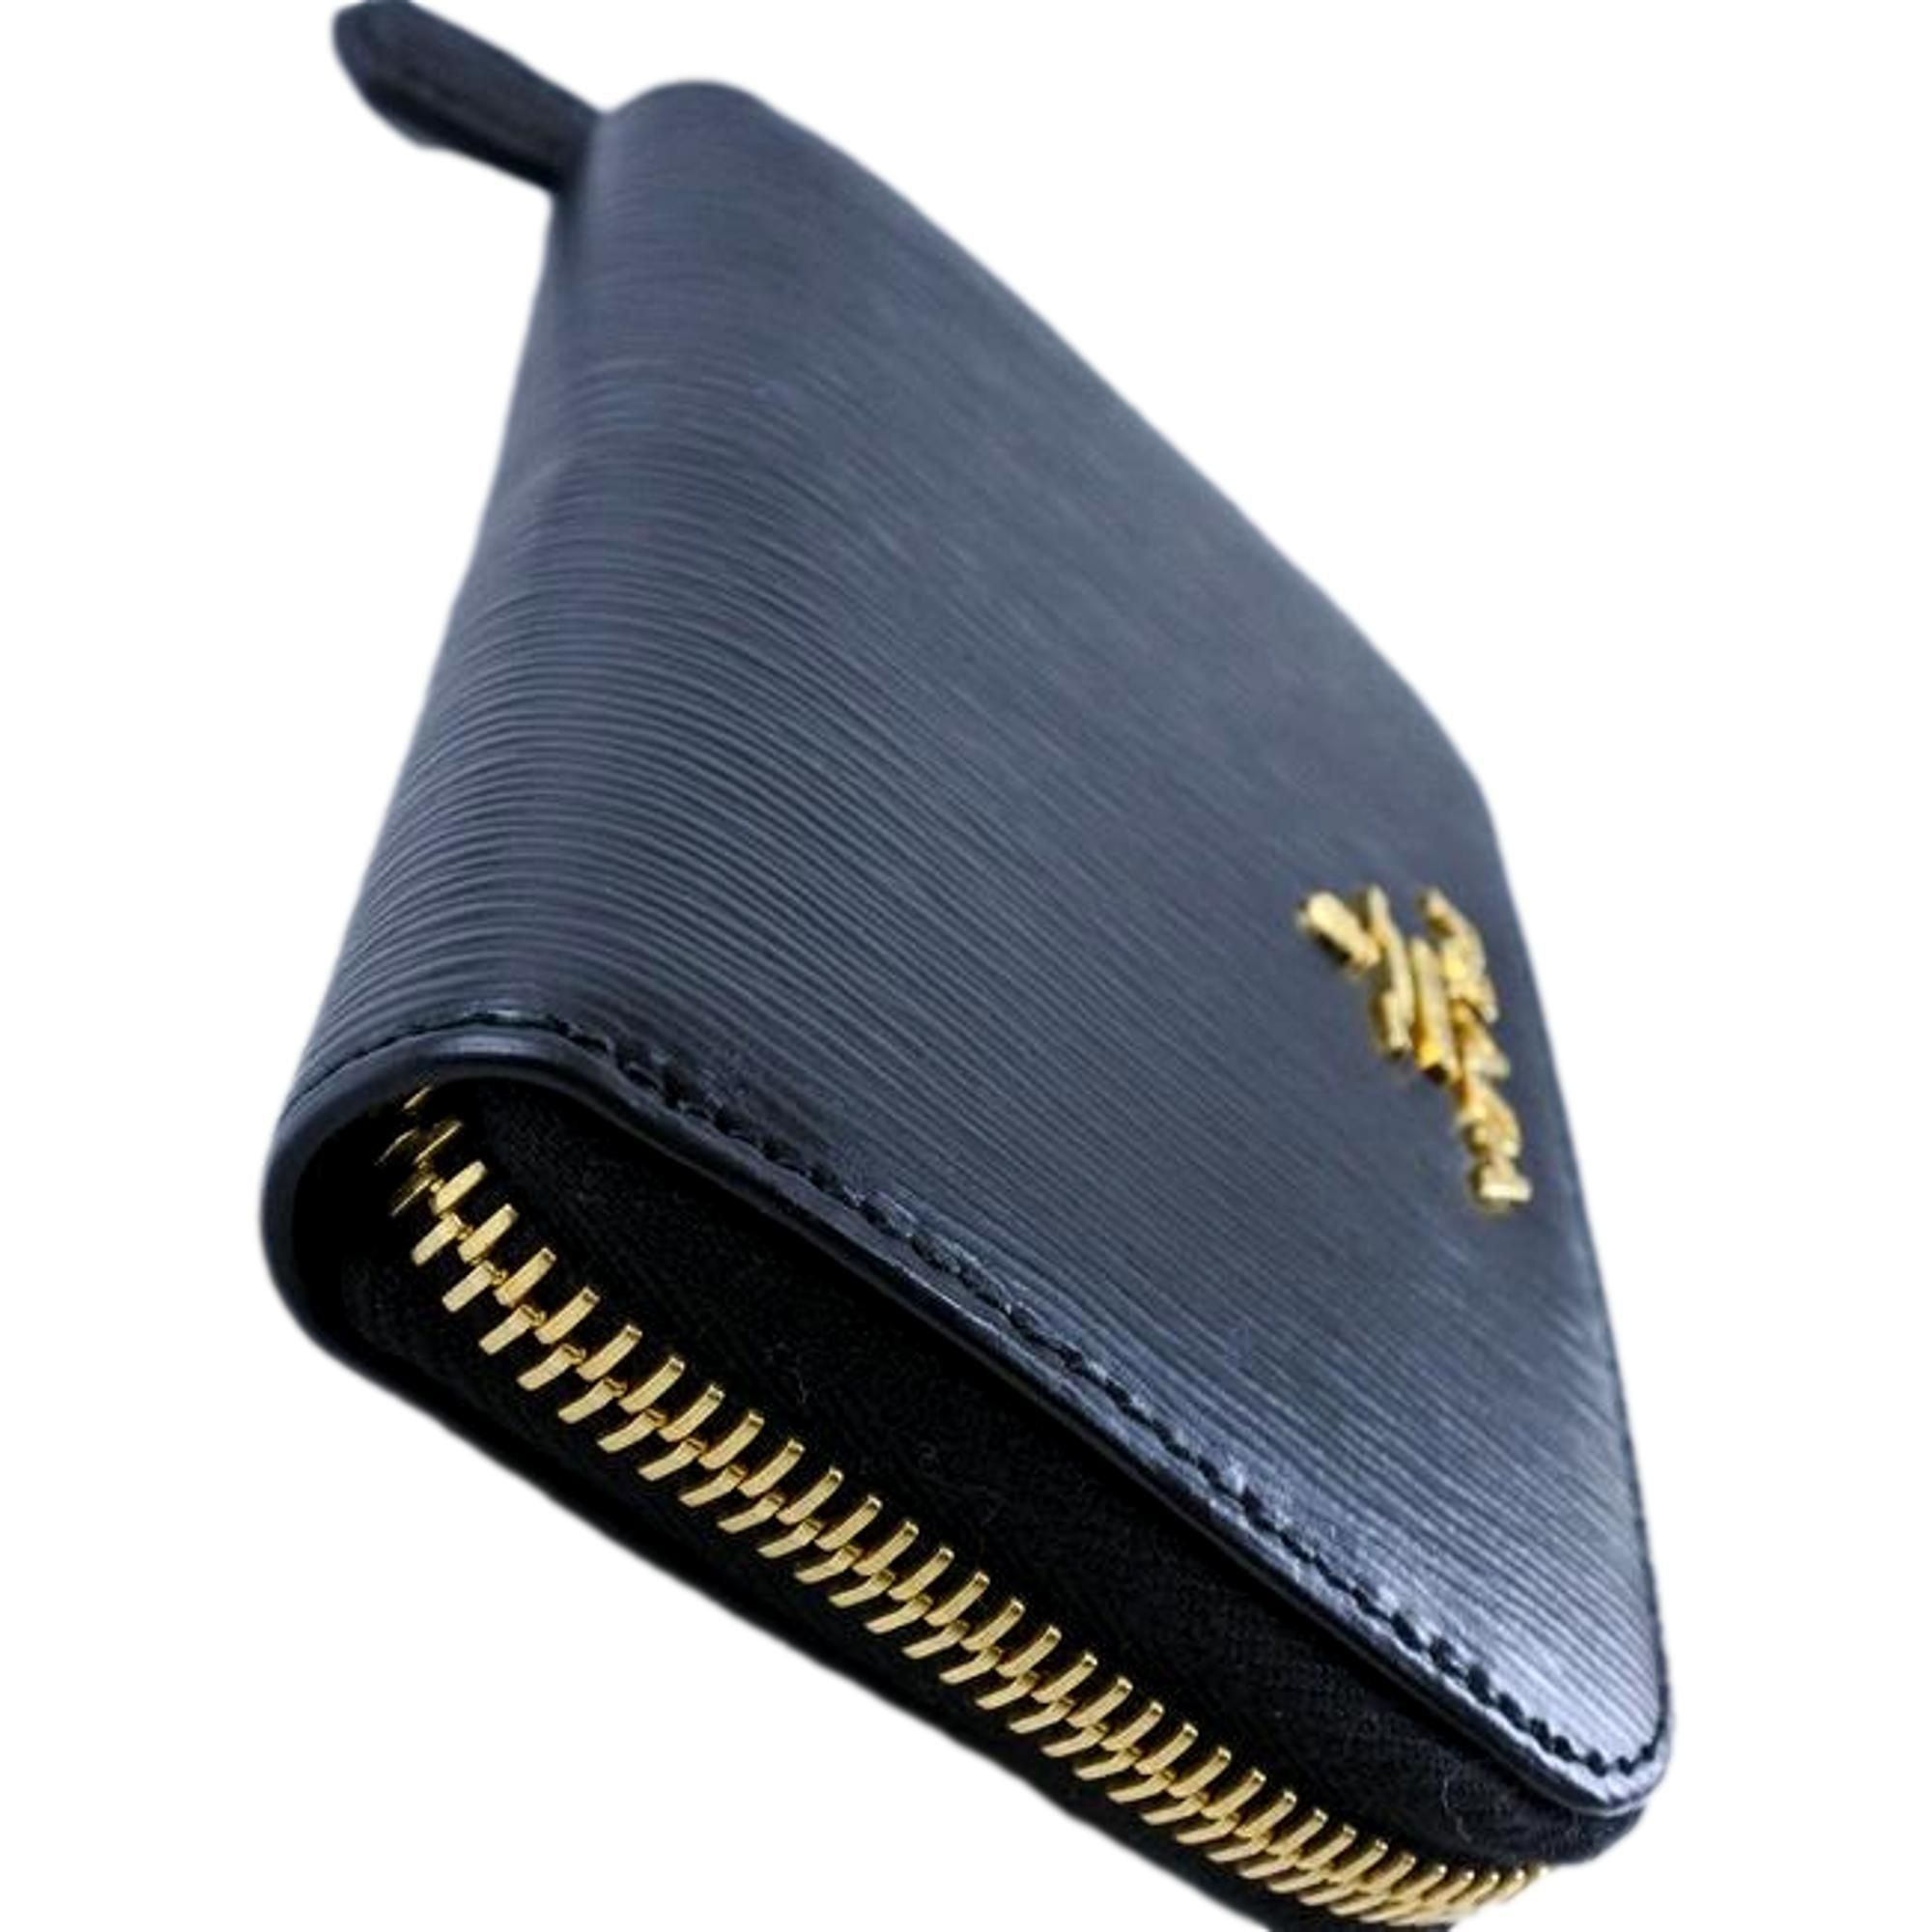 Prada Black Vitello Leather Gold Zip Coin Purse Wallet at_Queen_Bee_of_Beverly_Hills